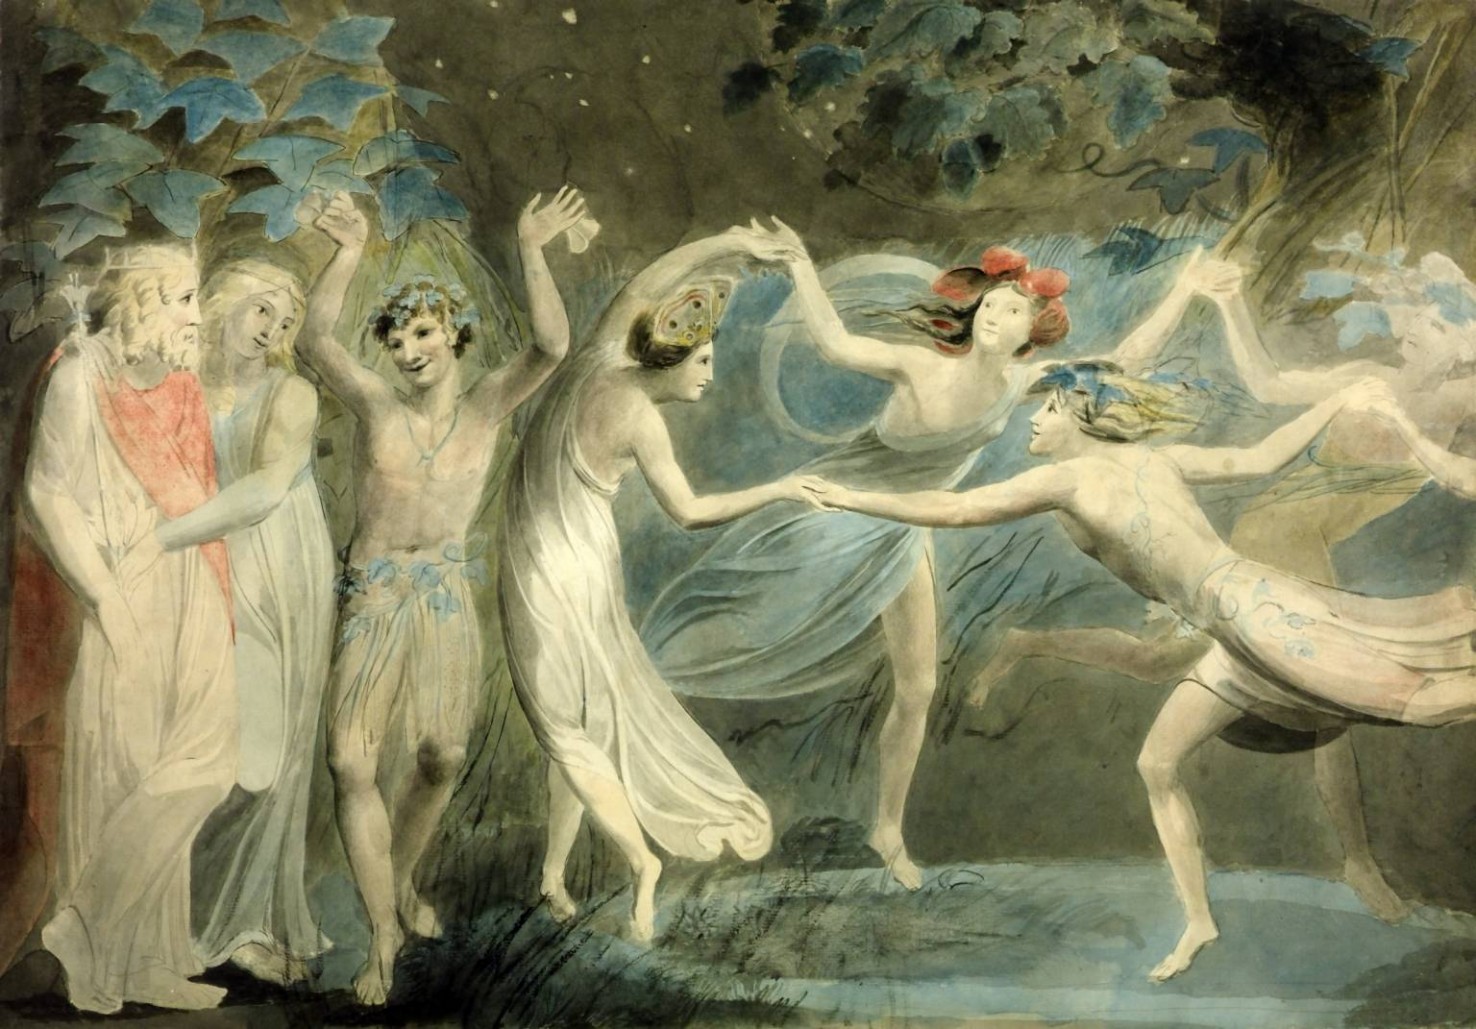 Oberon, Titania and Puck with Fairies Dancing circa 1786 by William Blake 1757-1827